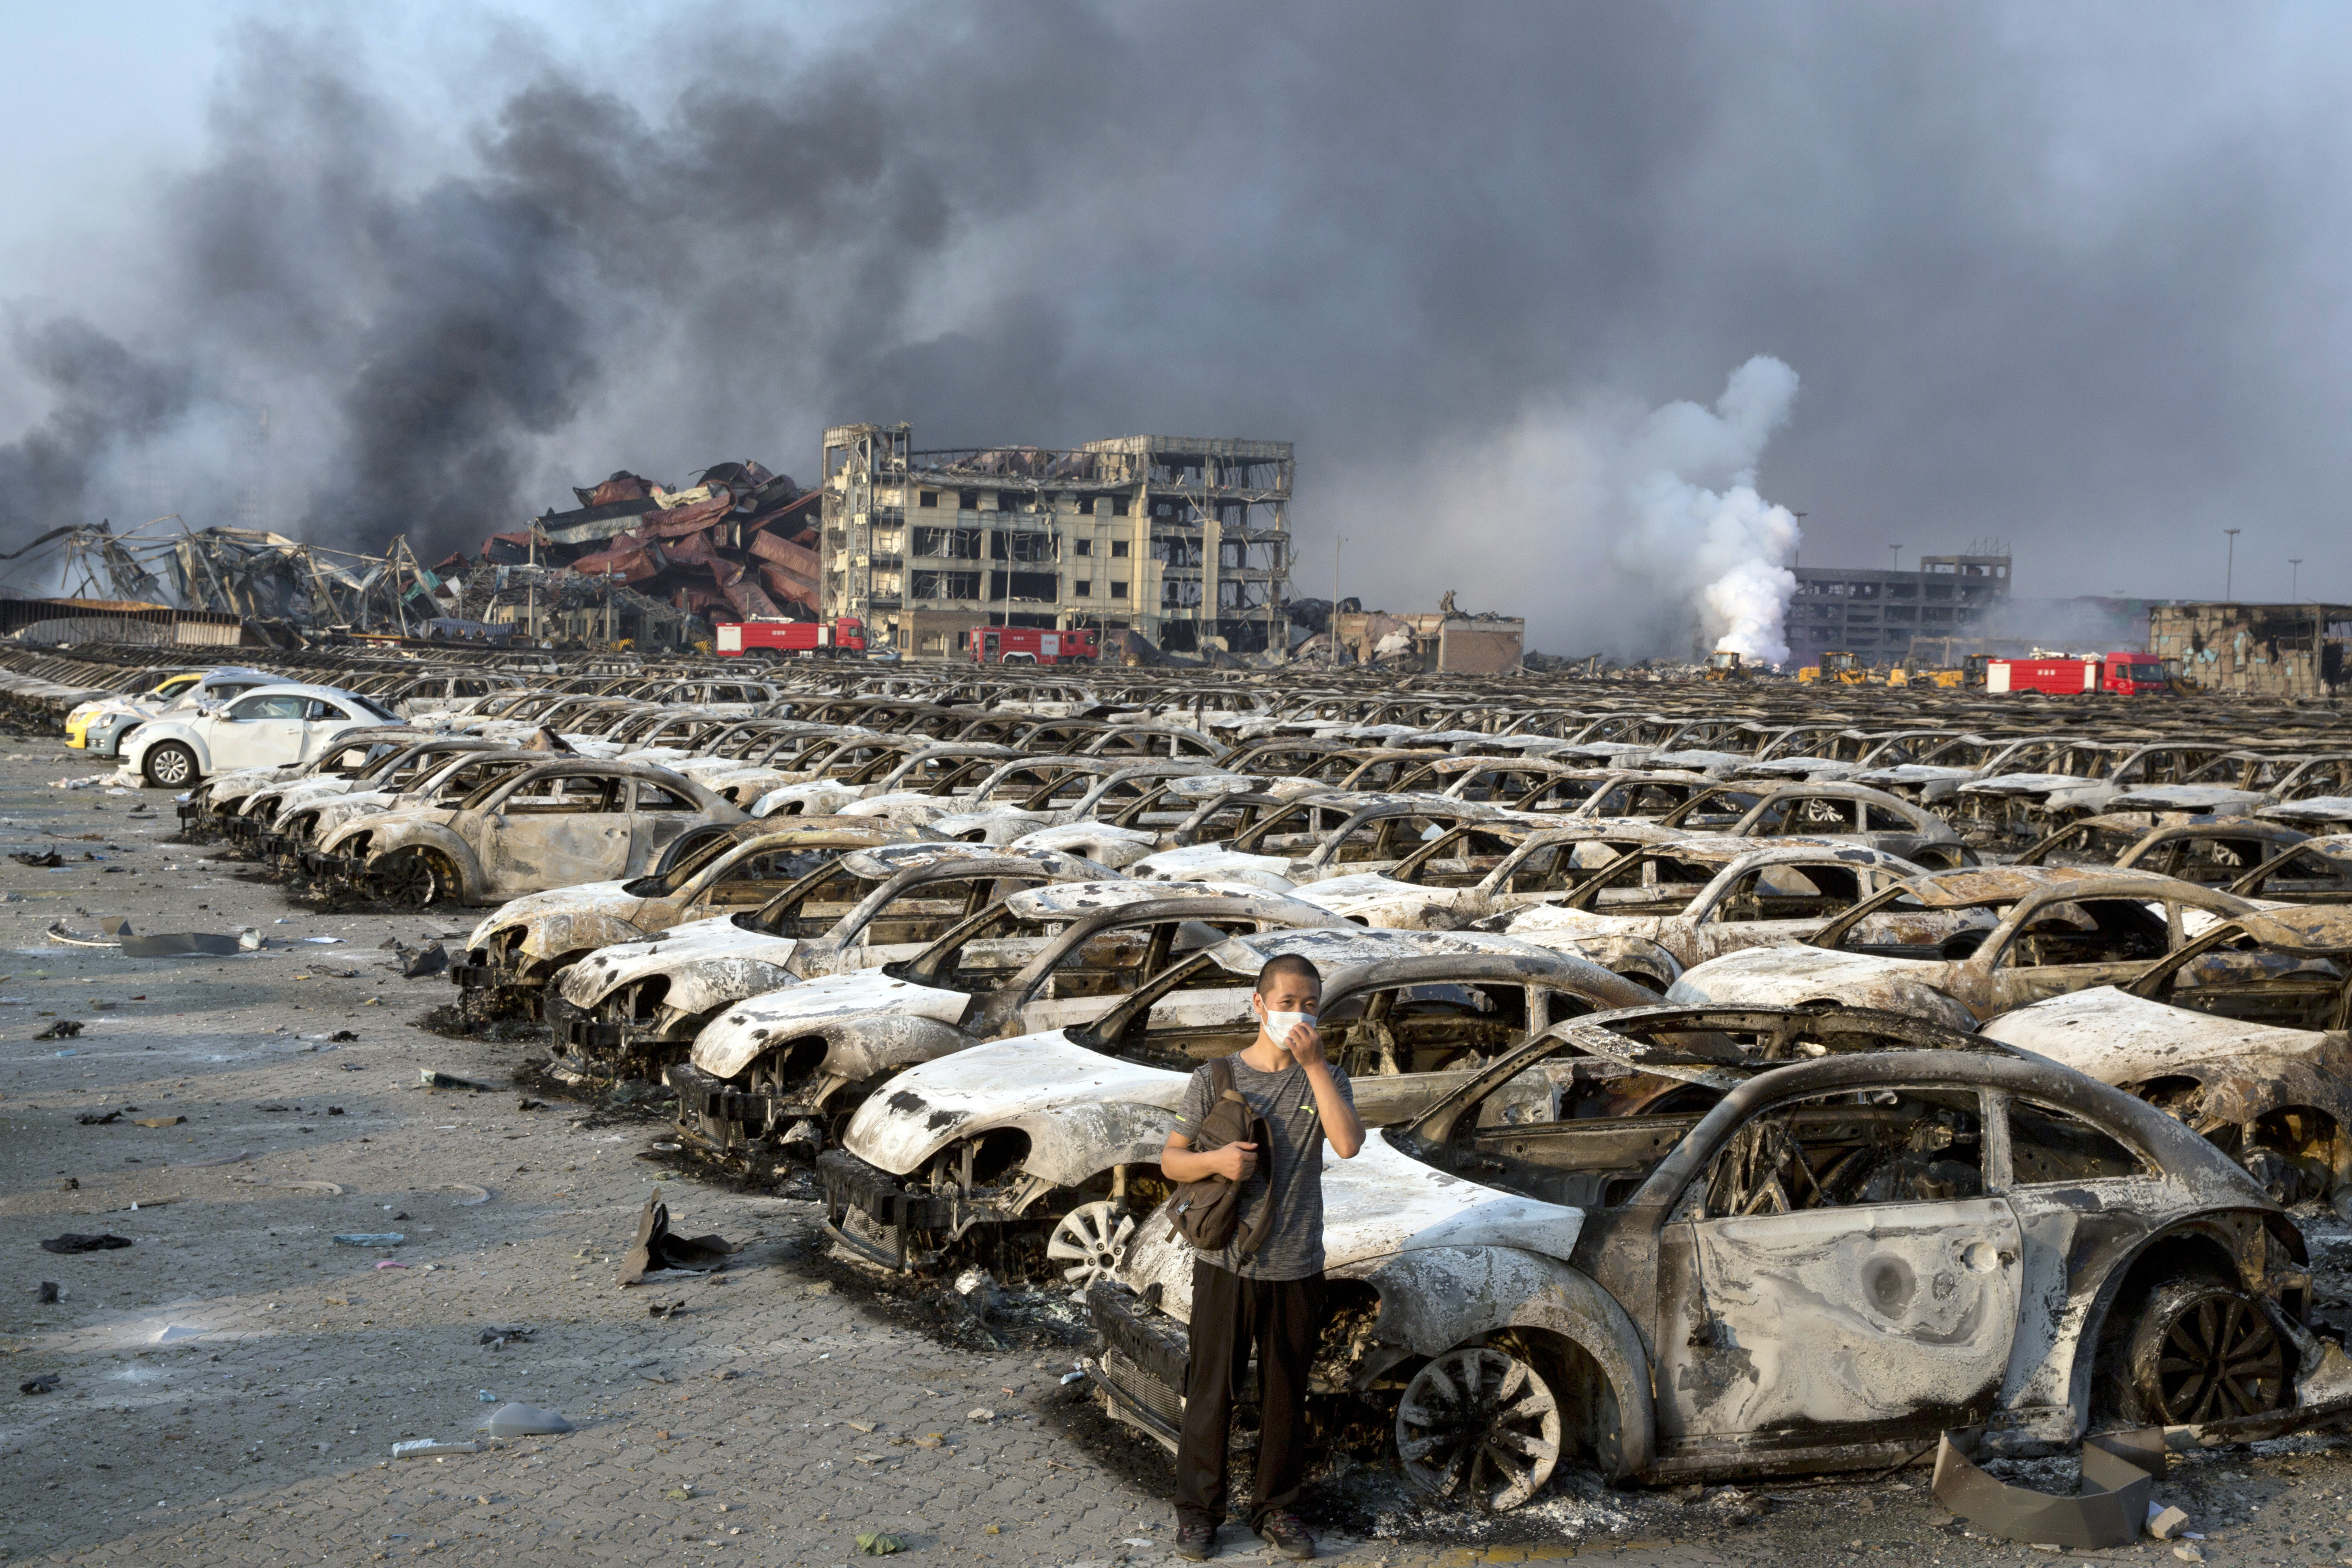 Hundreds of cars burned during the explosions in Tianjin. Photo: AP